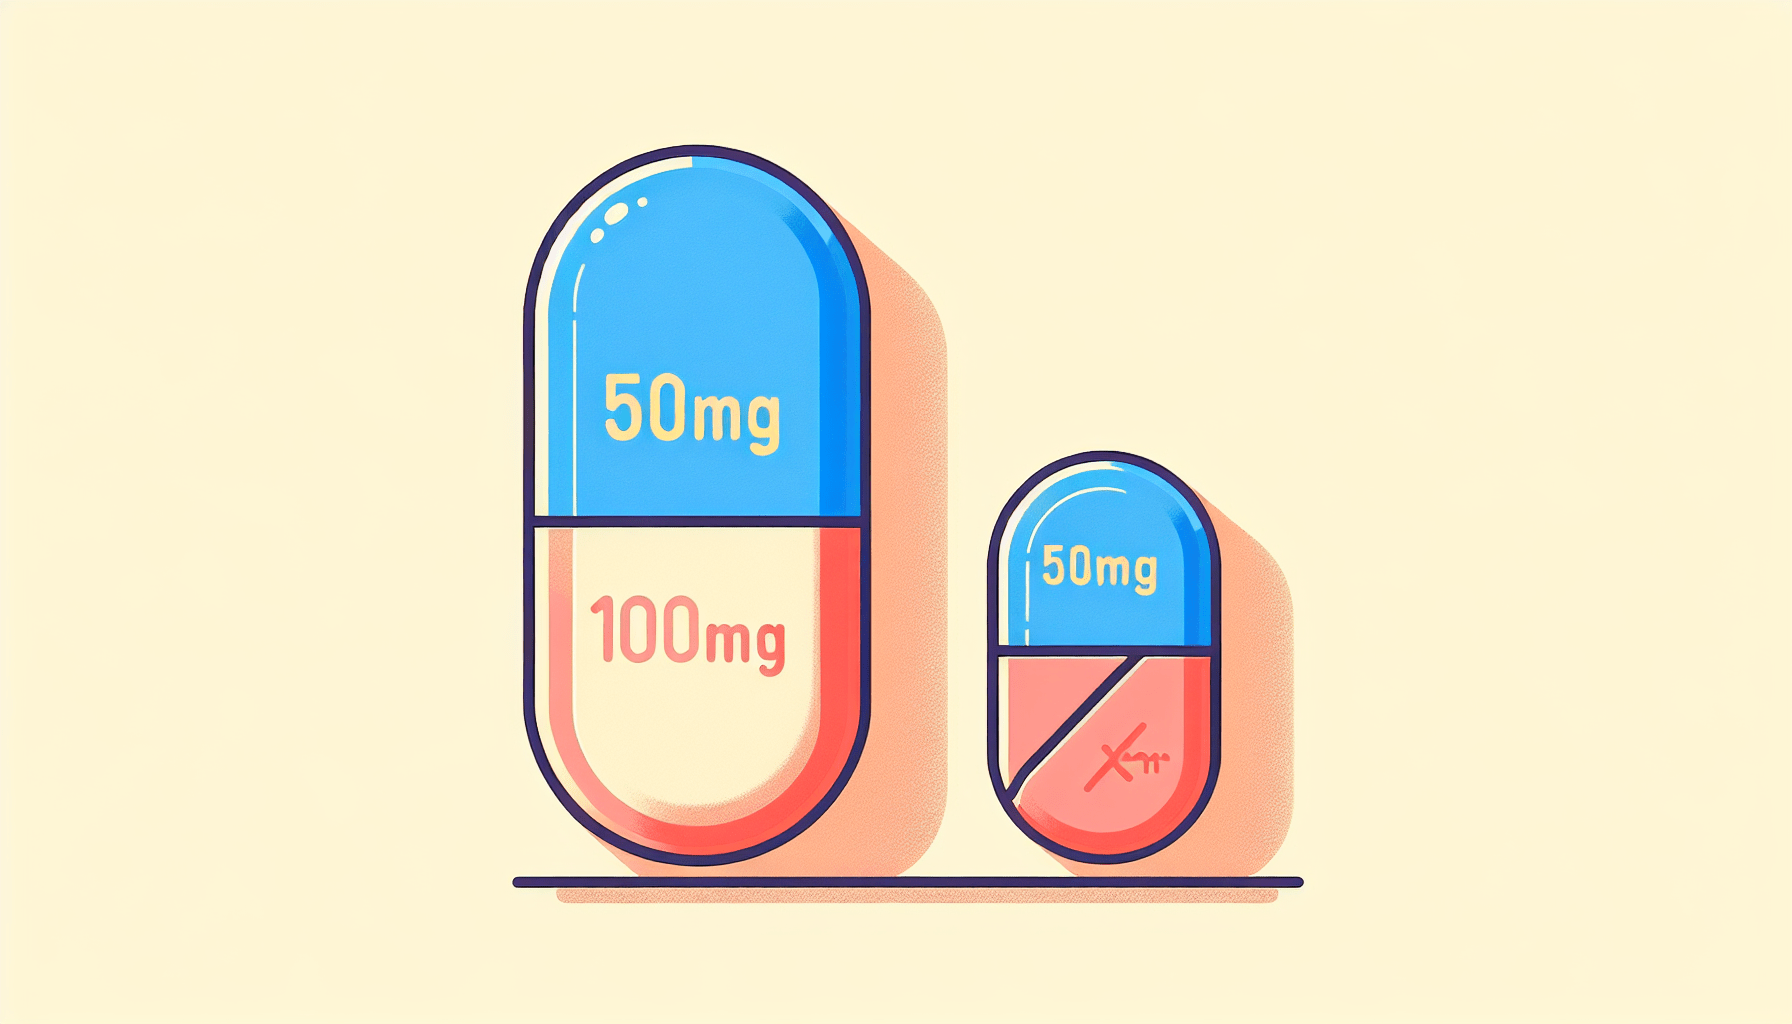 What Is Better 50mg Or 100mg Of Sildenafil?